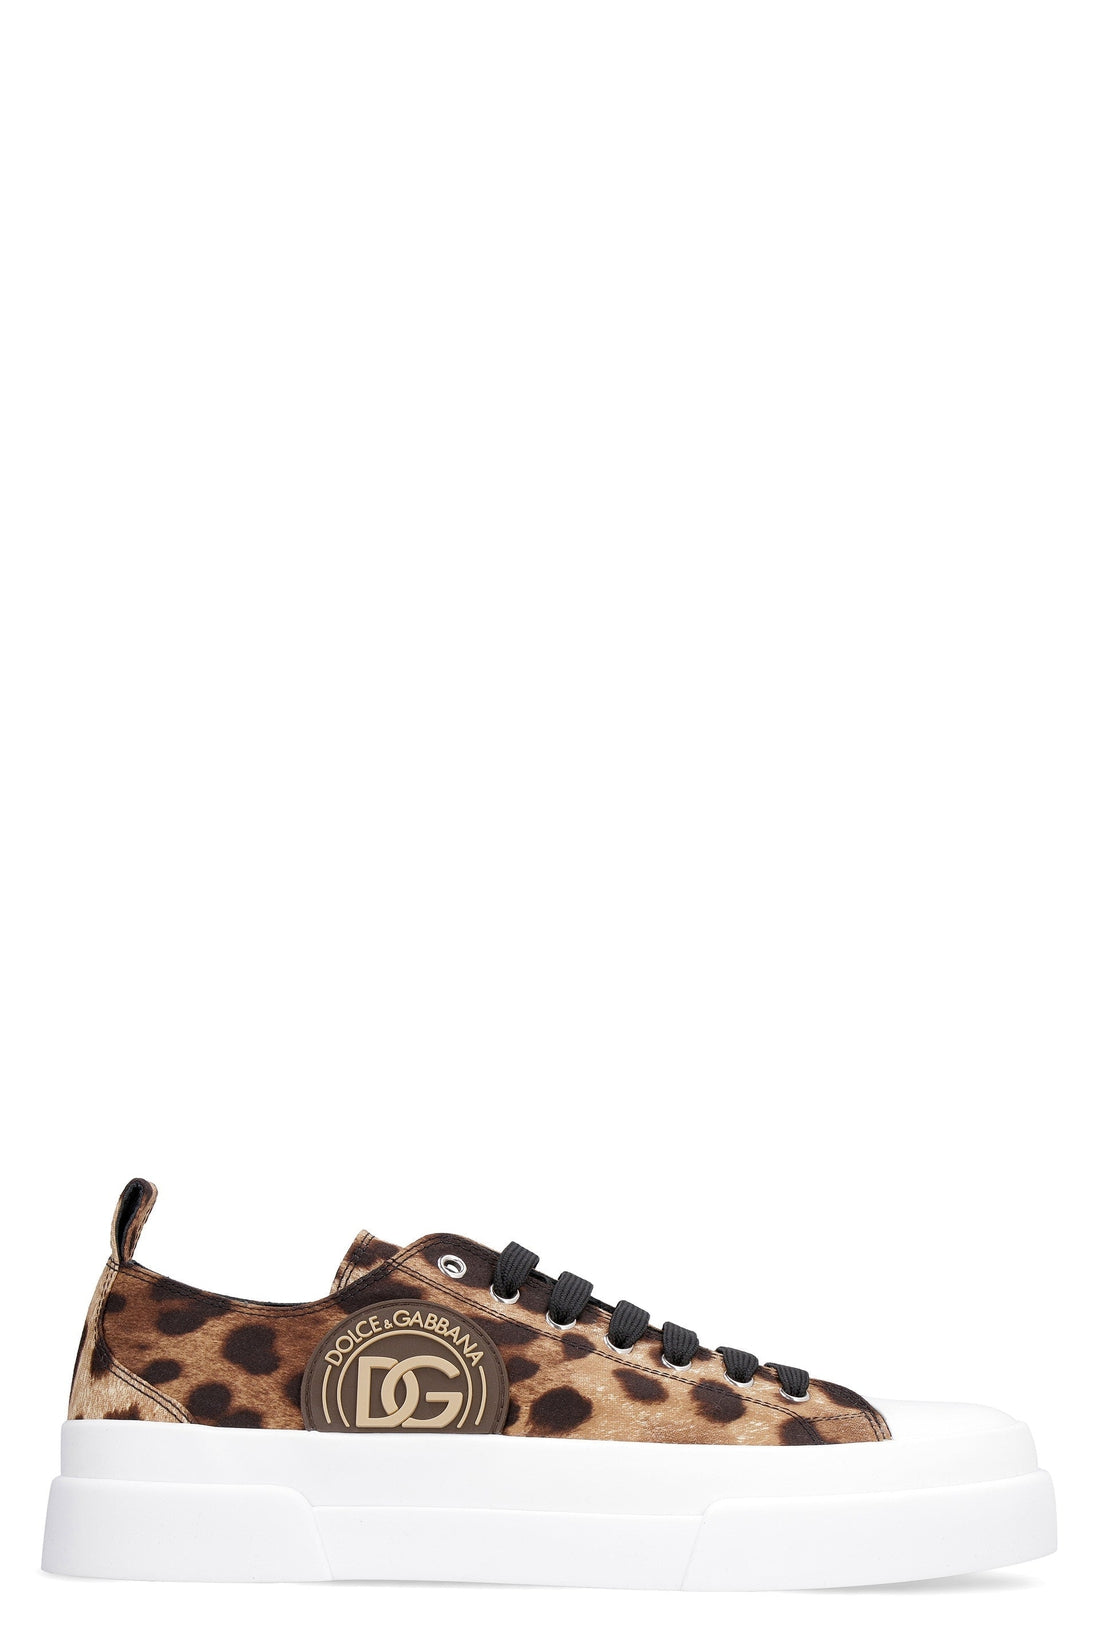 Dolce & Gabbana-OUTLET-SALE-Low-top sneakers-ARCHIVIST